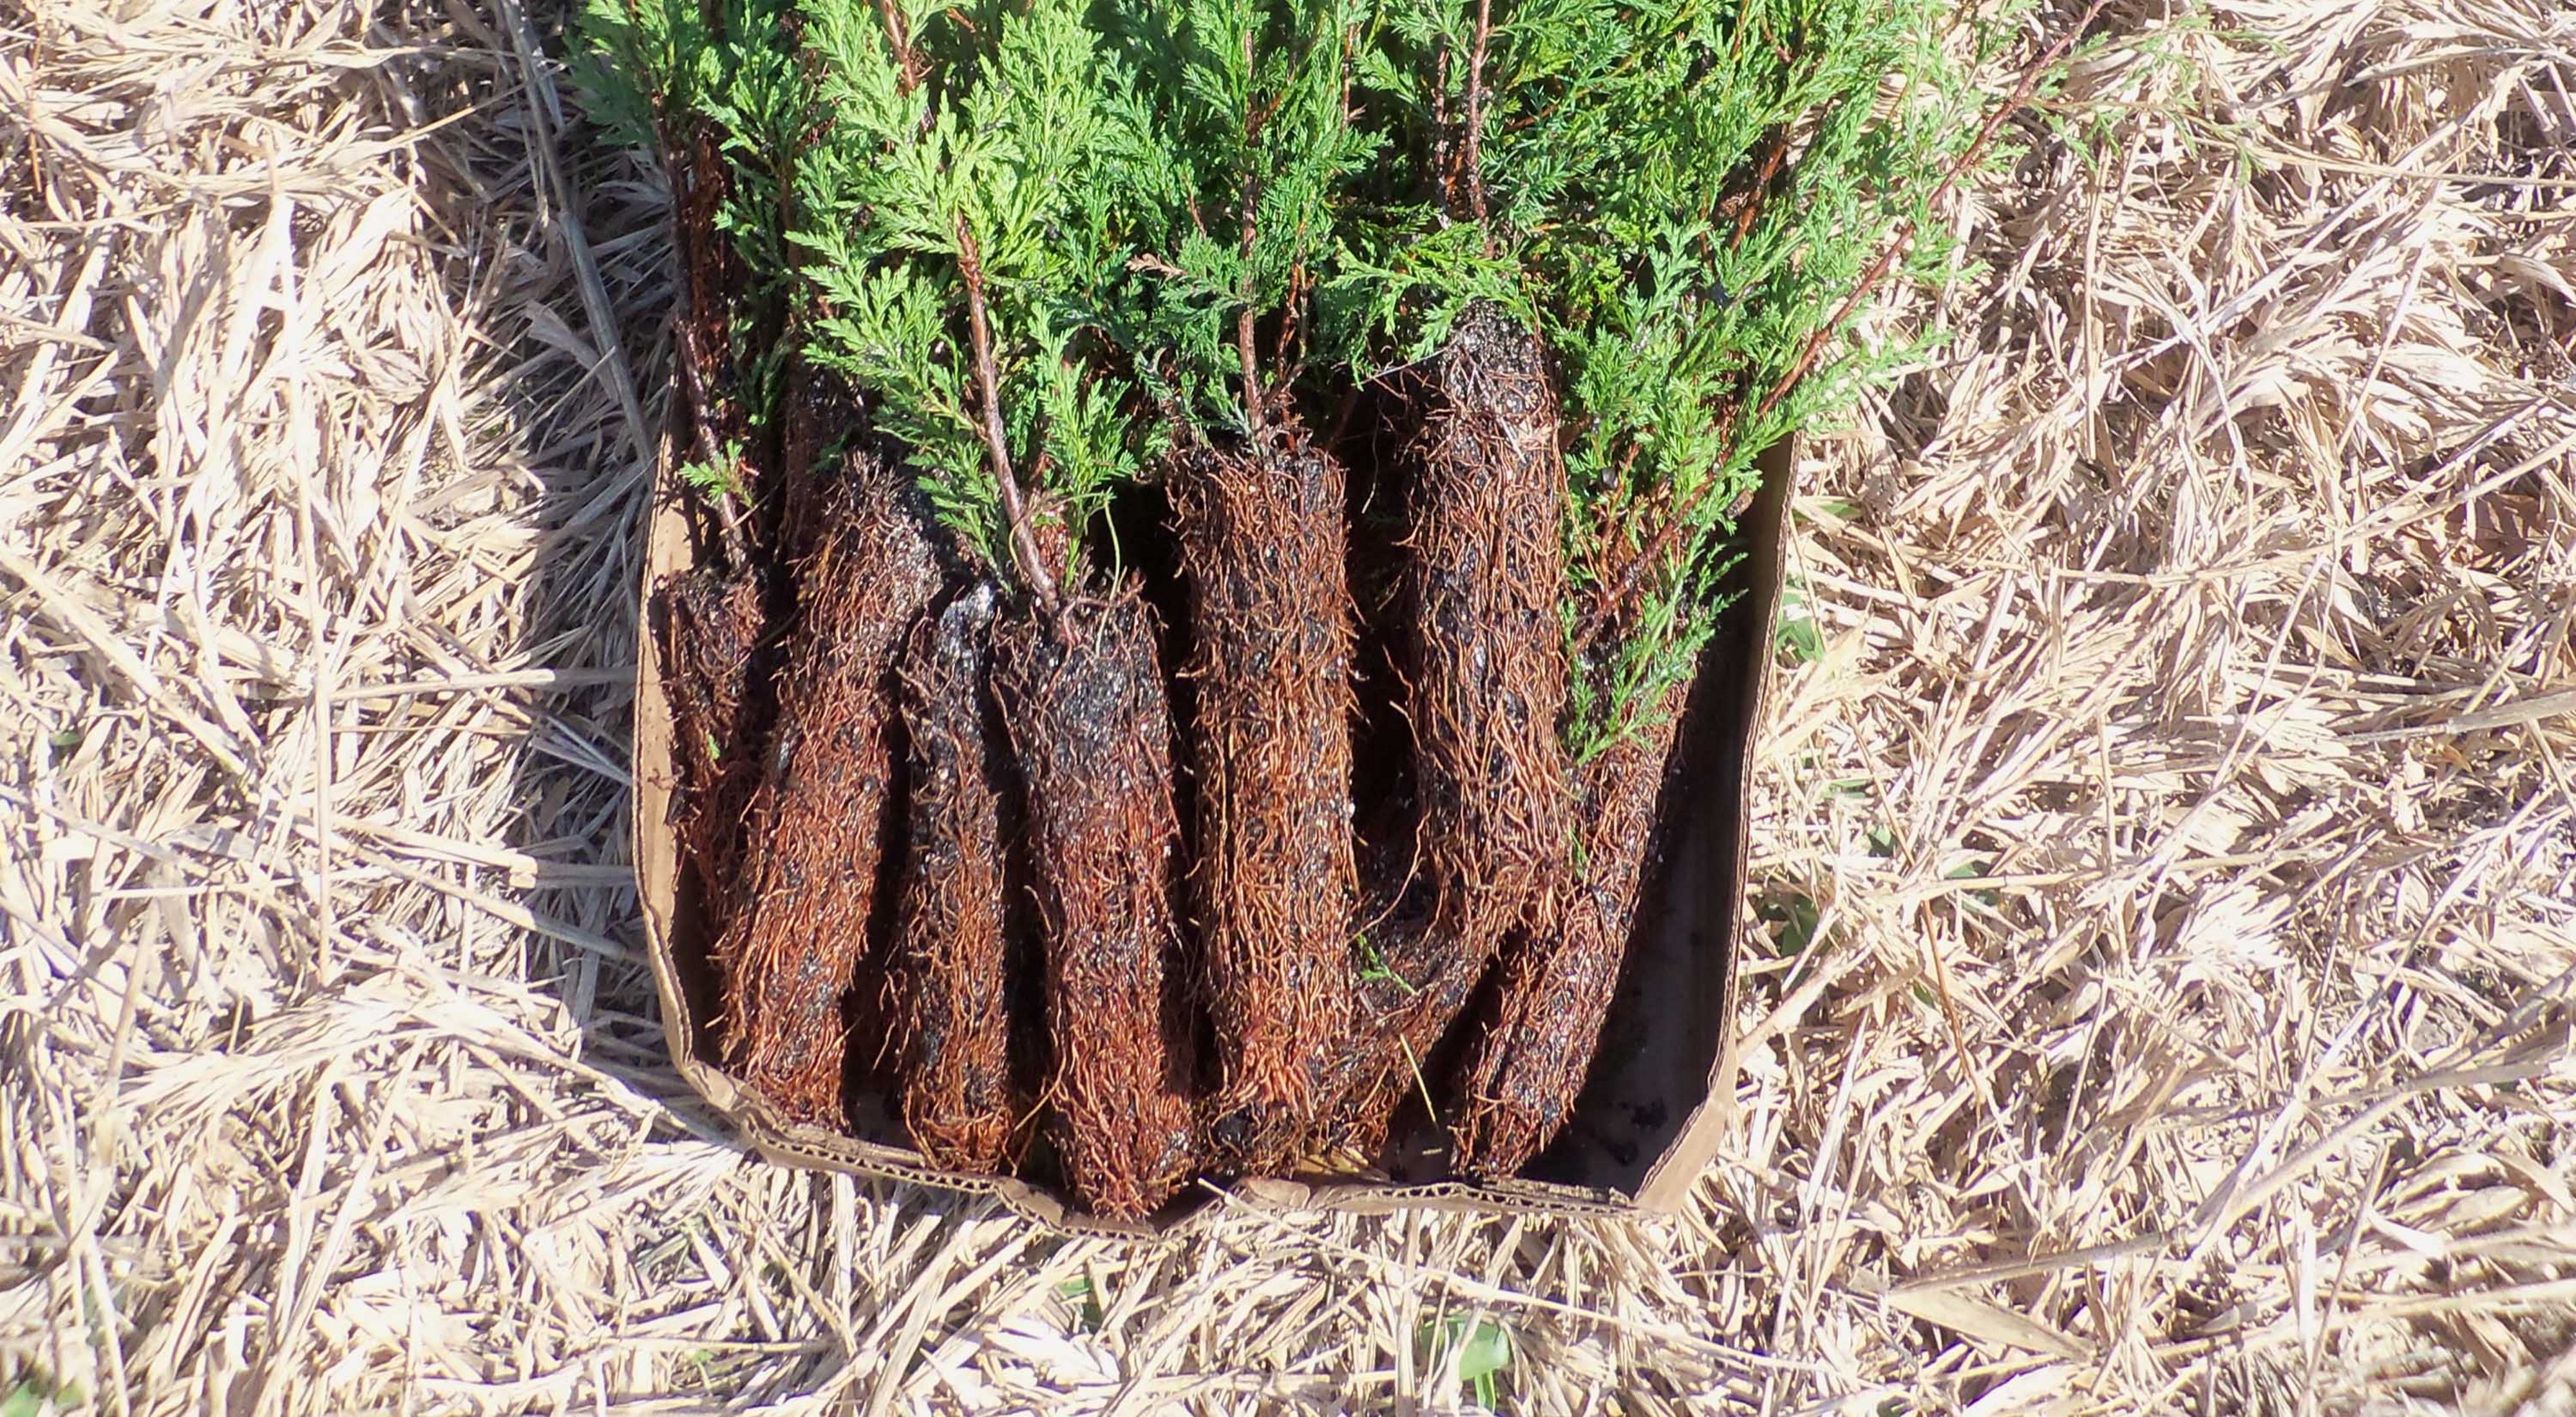 Atlantic white cedar seedlings lay in a pile in a shallow cardboard box awaiting planting. The seedlings' long, slender root balls are tightly packed.